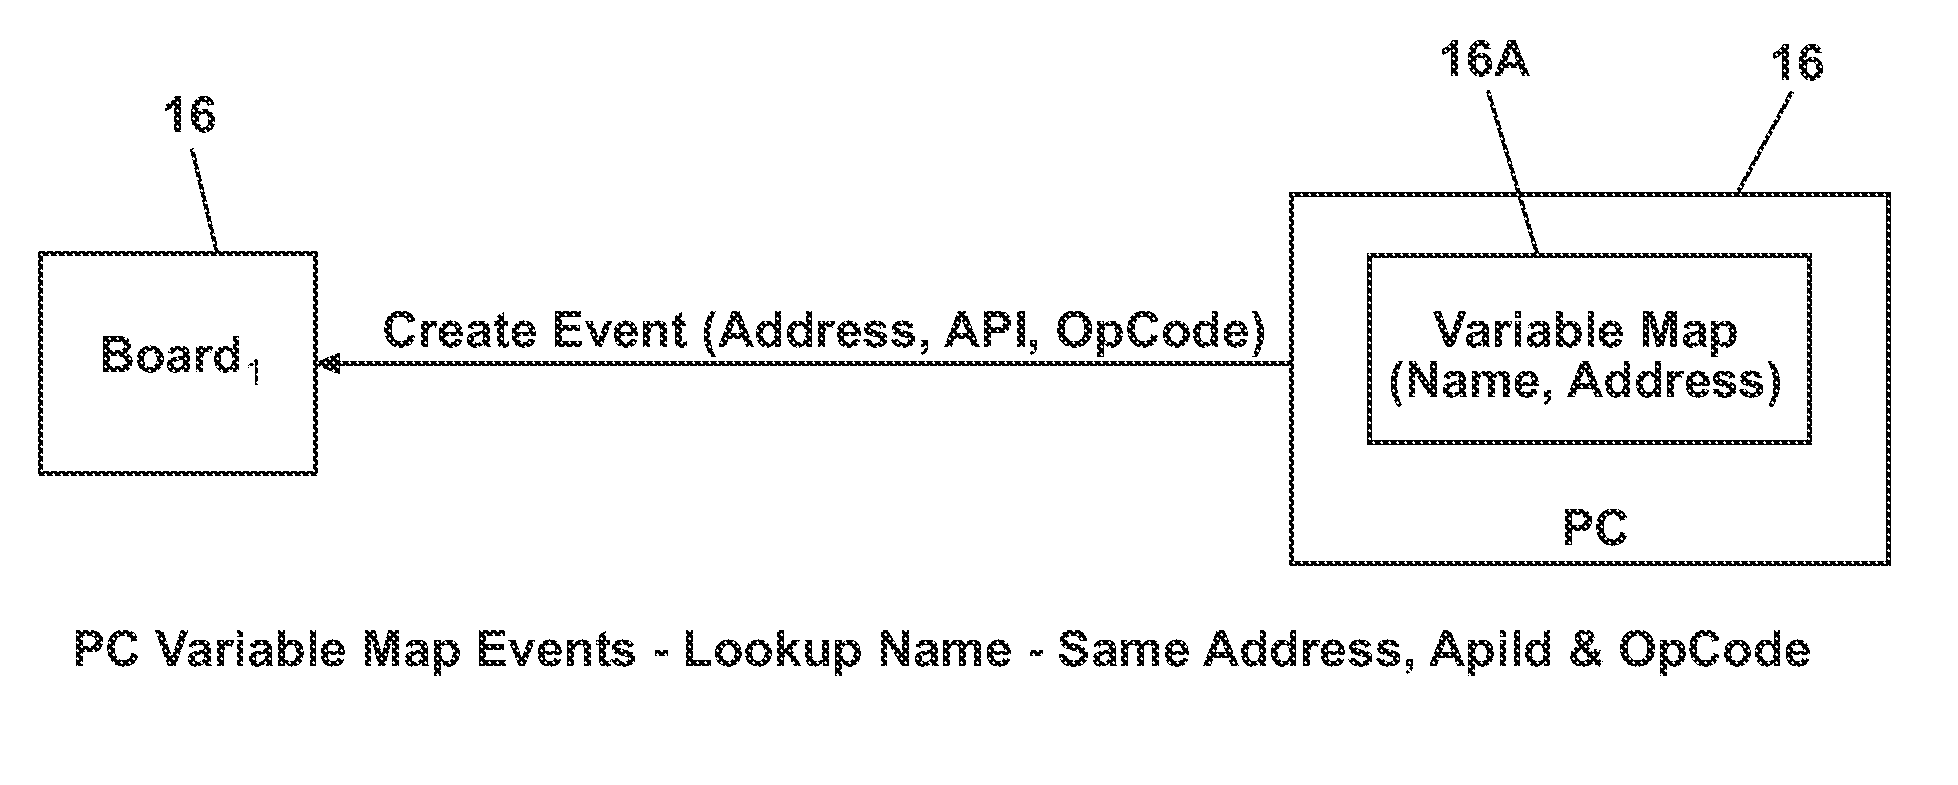 Event notification system for an appliance